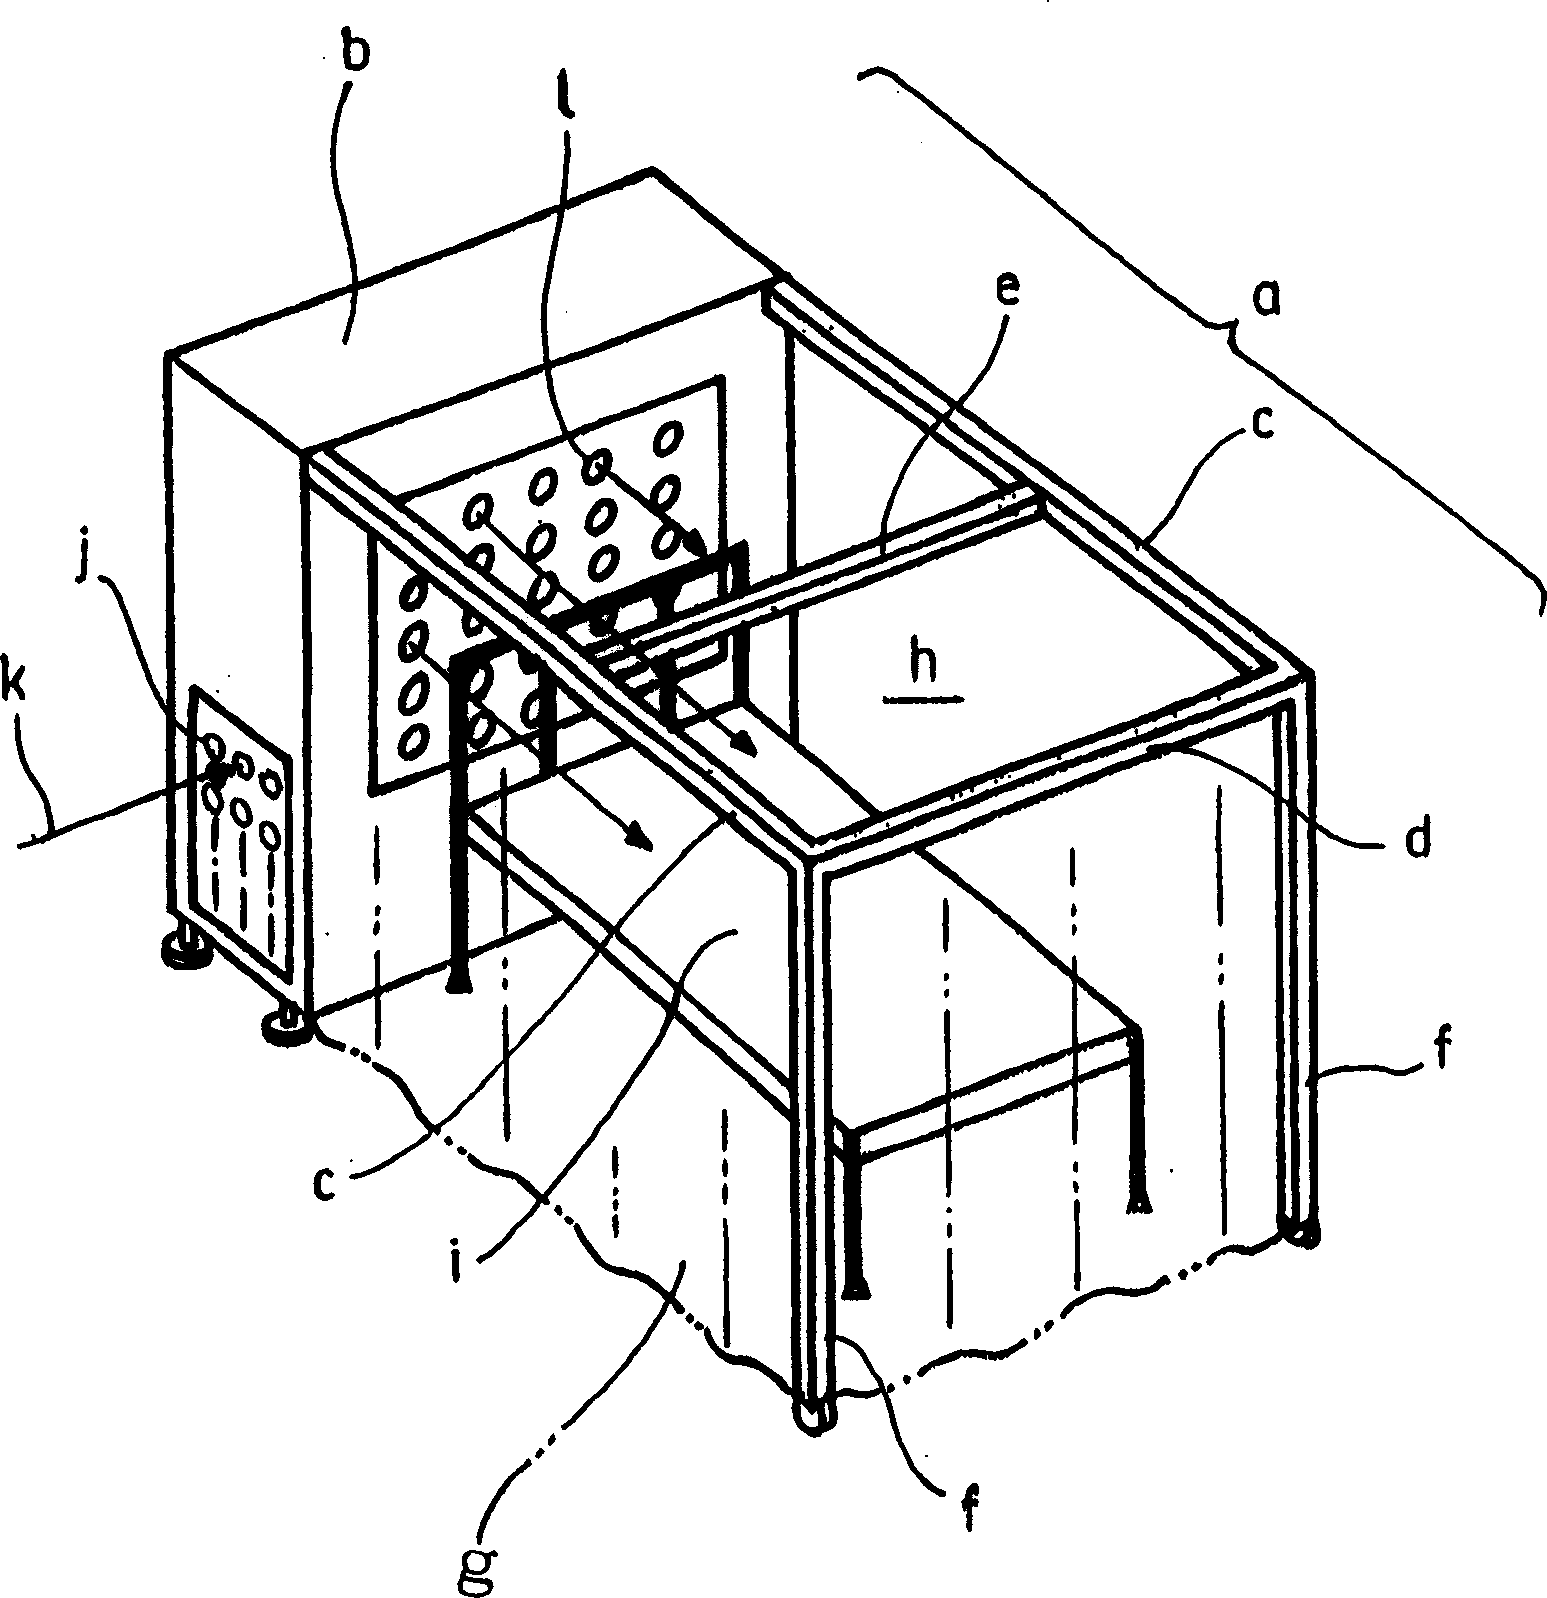 Desinfection chamber unit